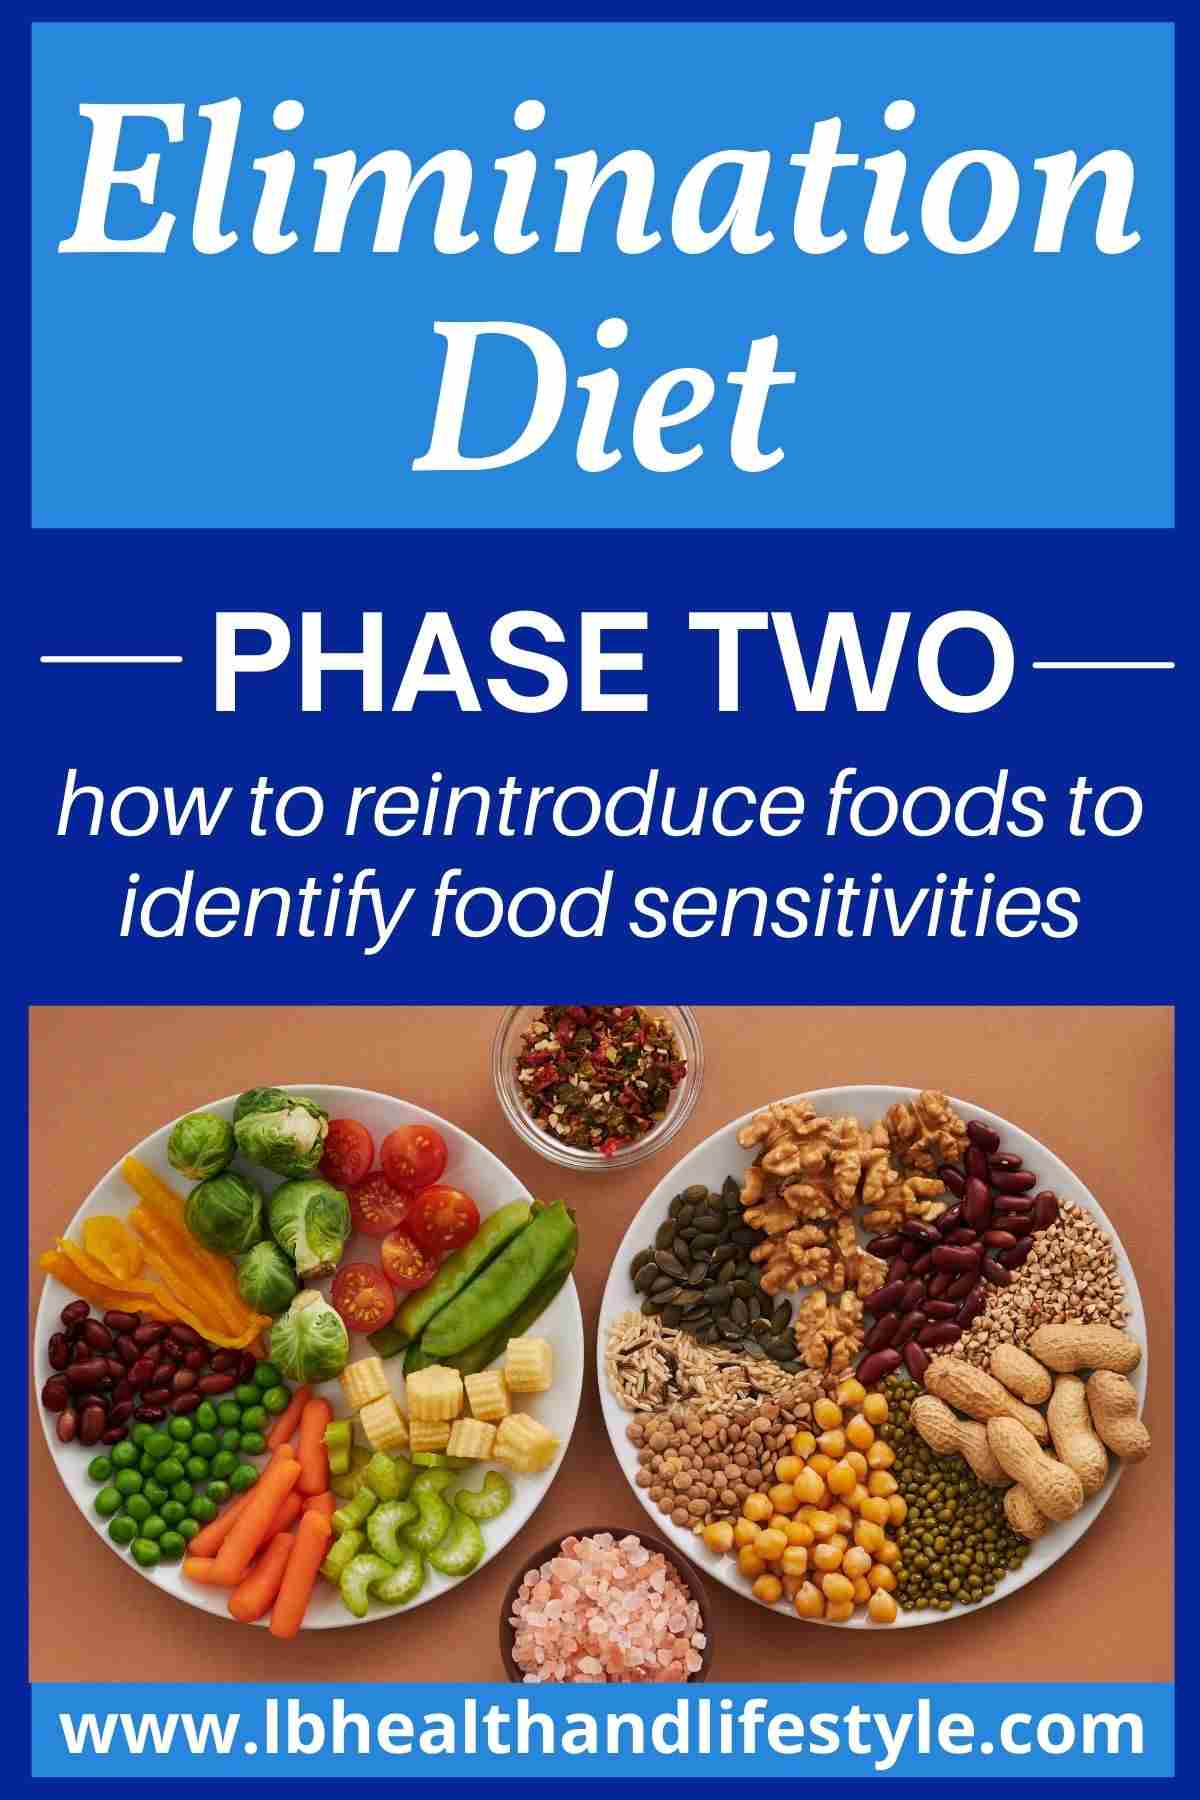 elimination diet phase two. How to reintroduce foods after elimination diet to identify food sensitivities